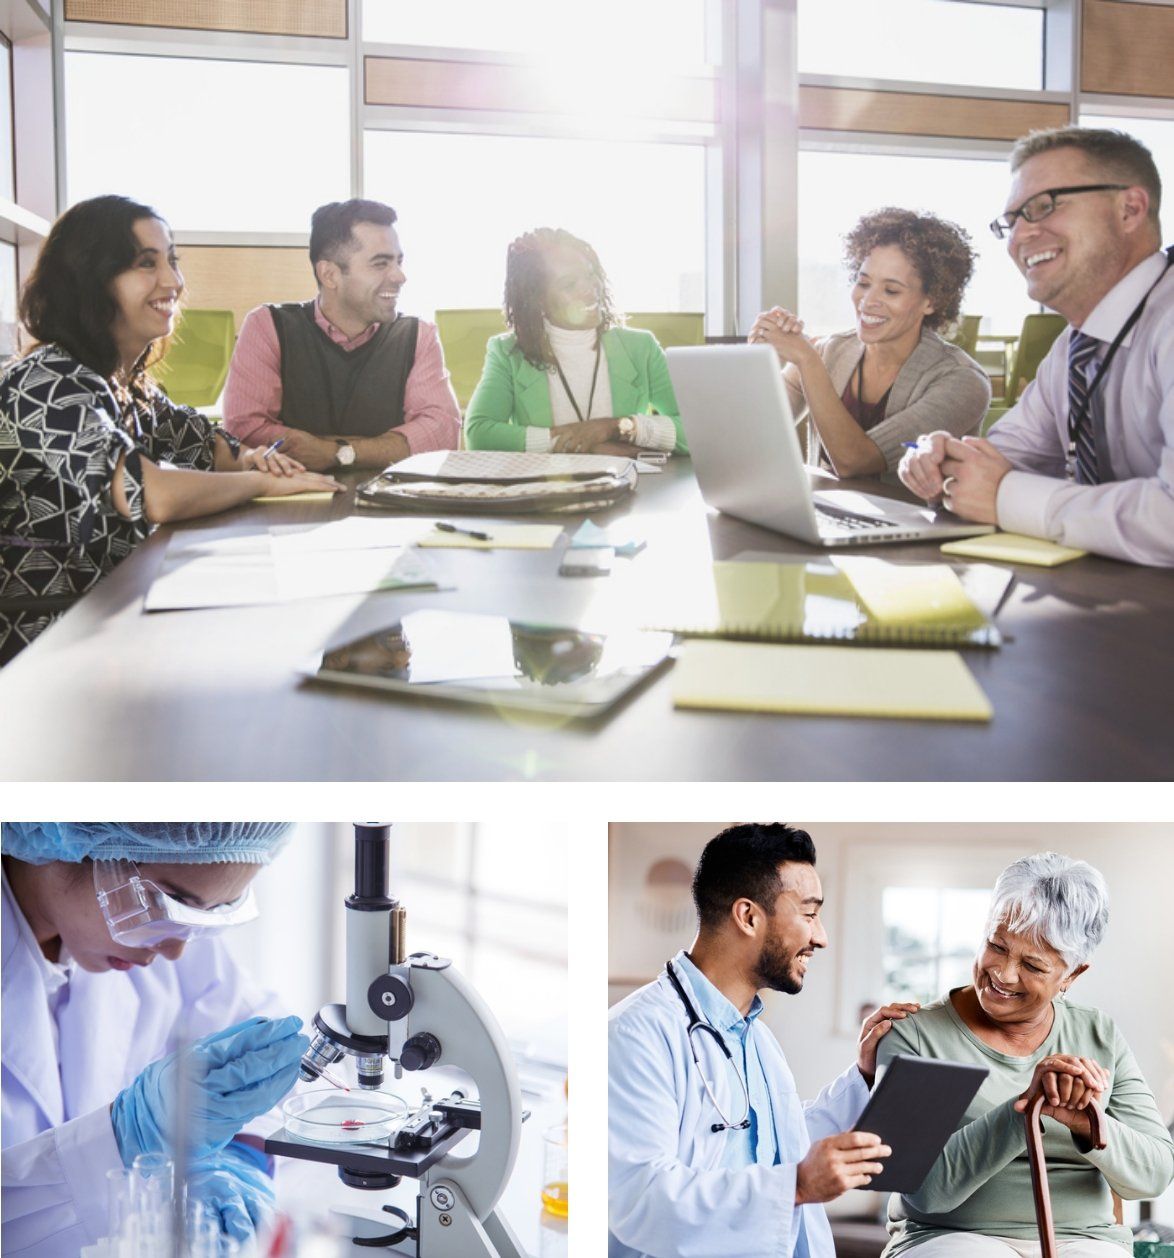 A collage of 3 images. First images shows a group of people having a meeting. Second image shows a scientists working with a microscope. Third image shows a doctor and patient smiling to each other.